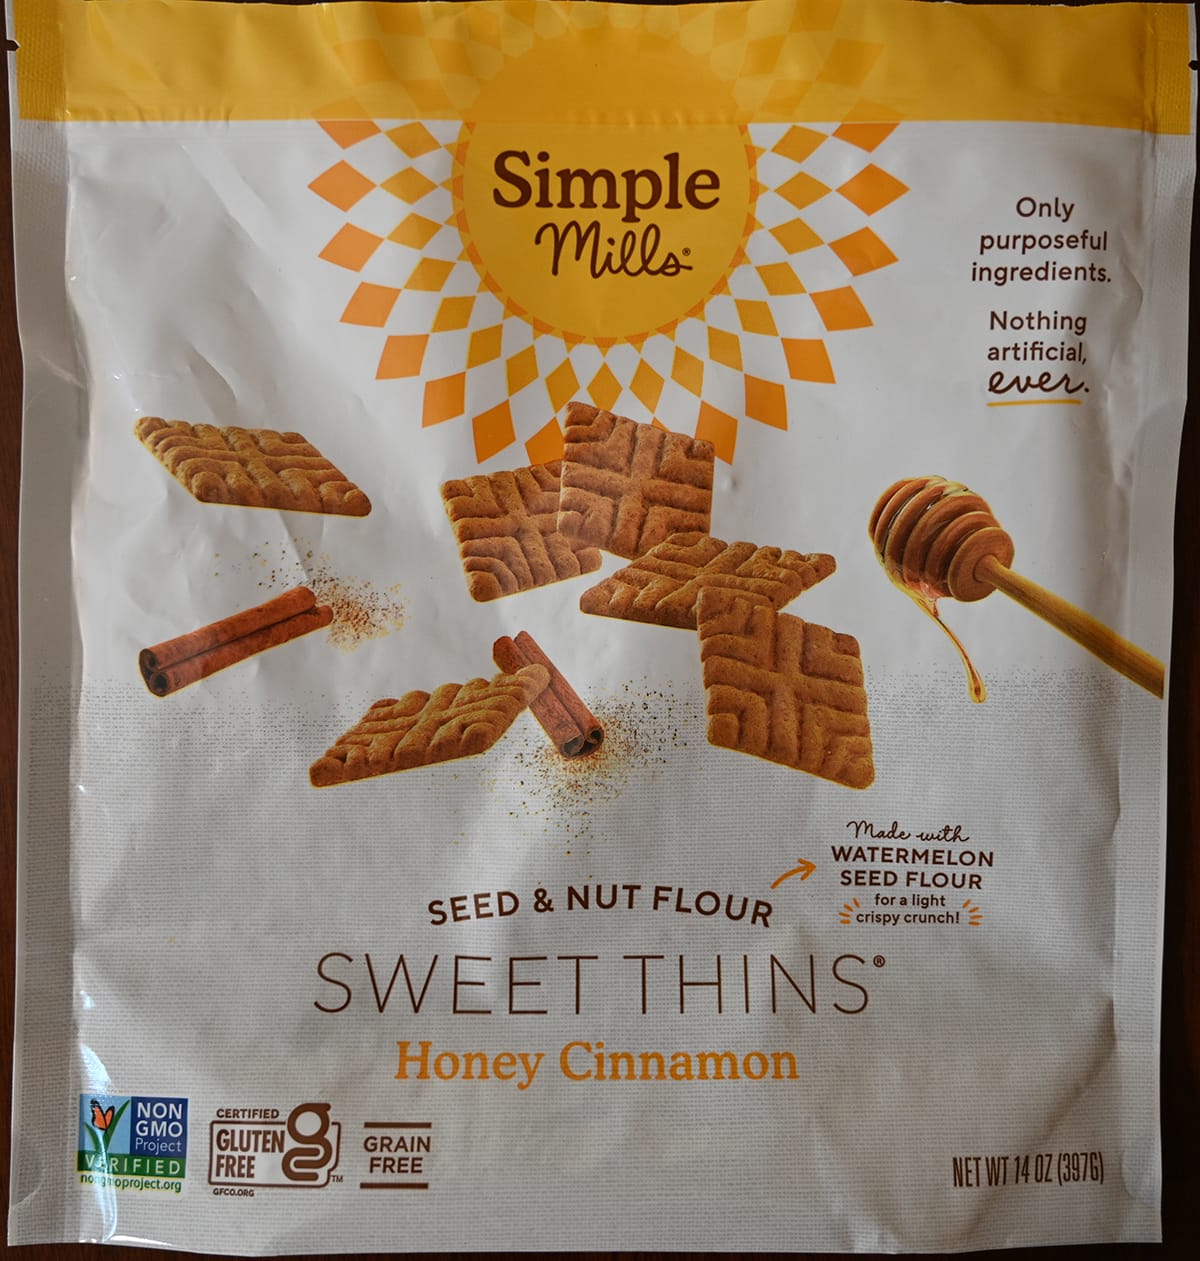 Closeup image of the front of the honey cinnamon Sweet Thins bag showing the weight and that they're Non-GMO